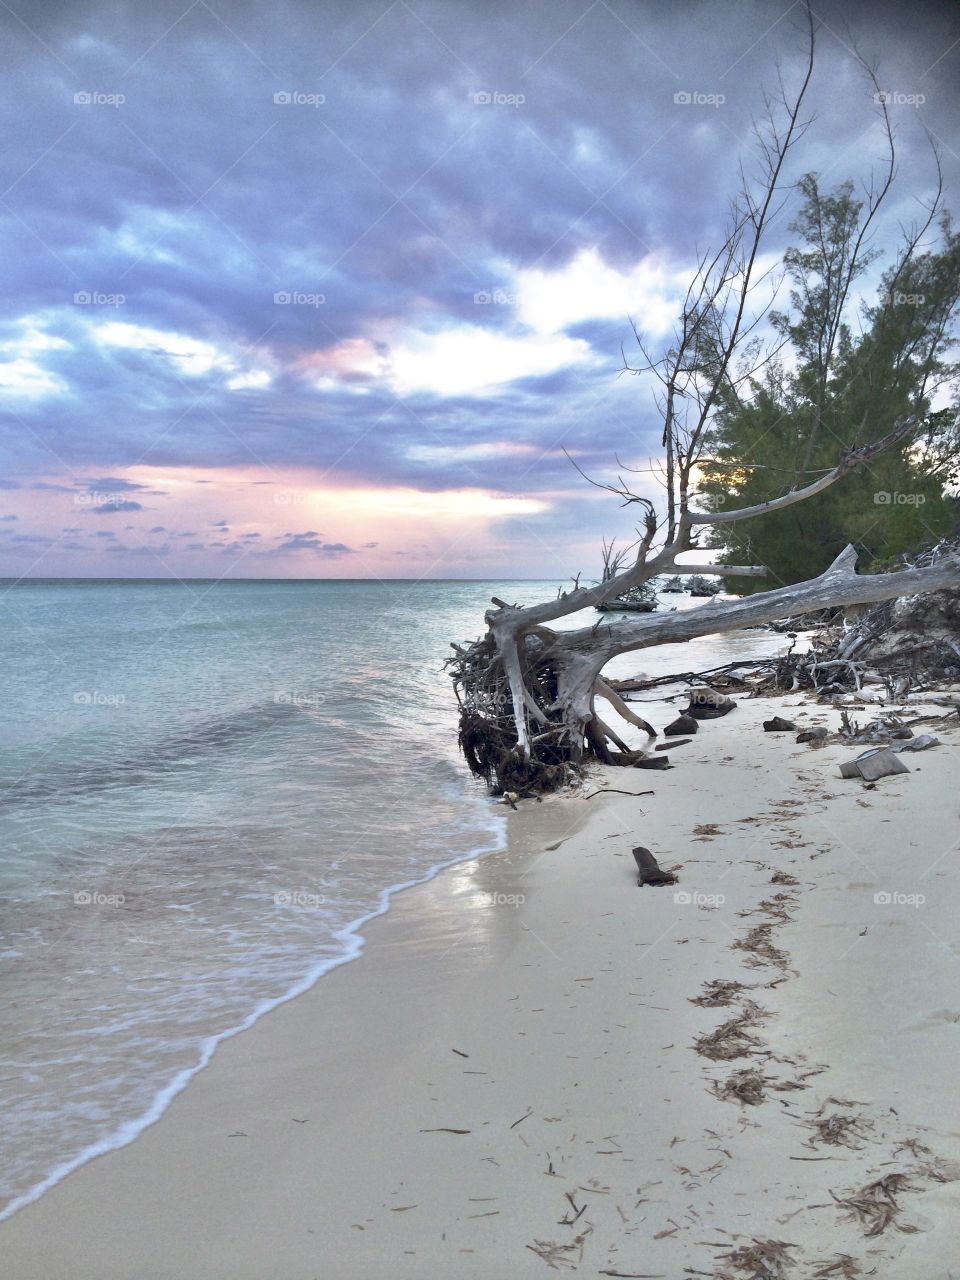 A tree falls in the Bahamas . A beautiful sunset 